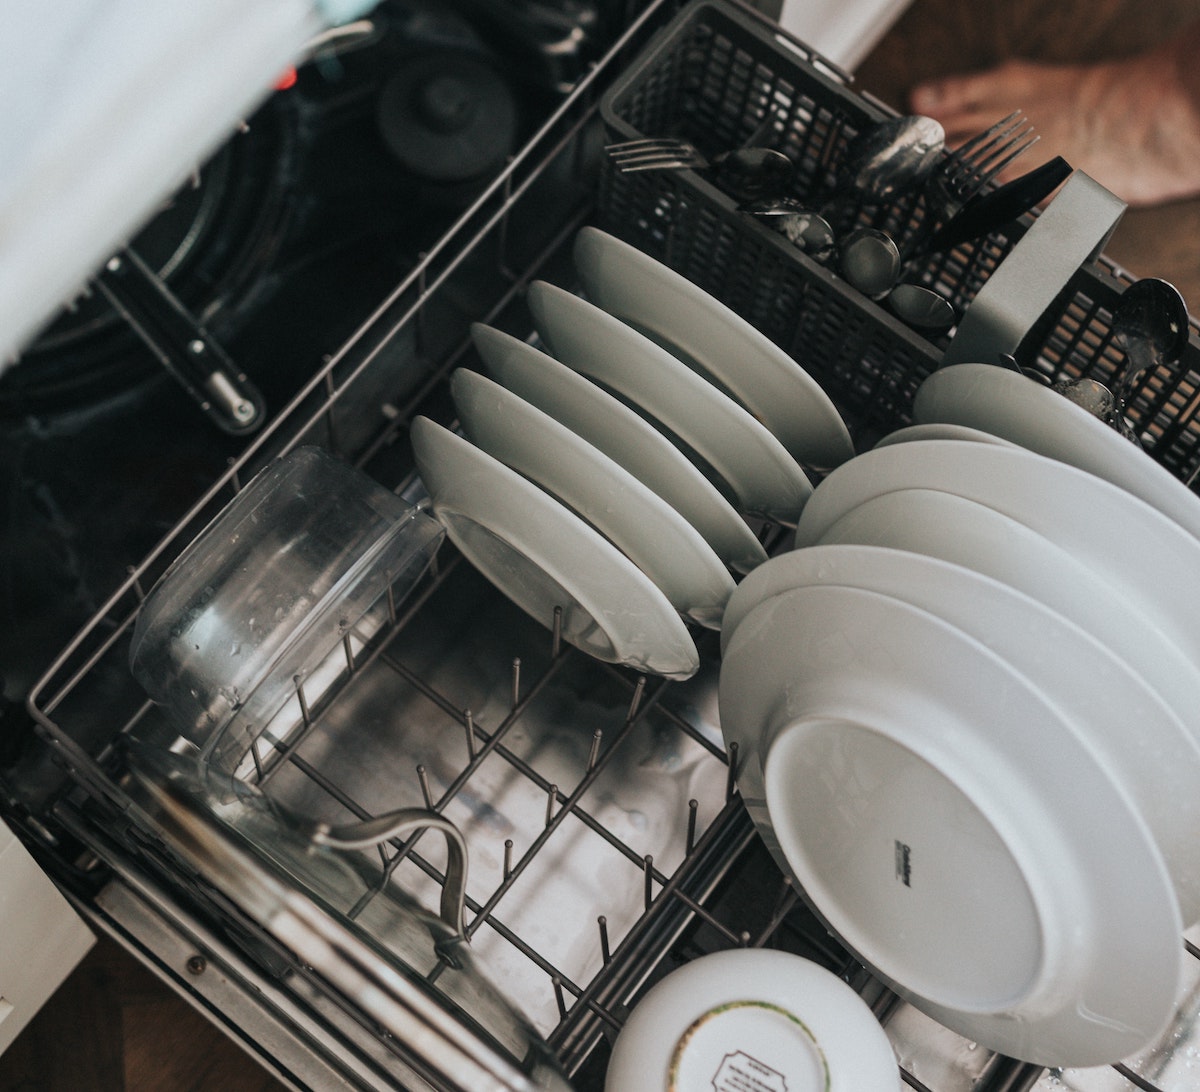 An Integrated Dishwashers Guide – 7 Best Tips Before Buying